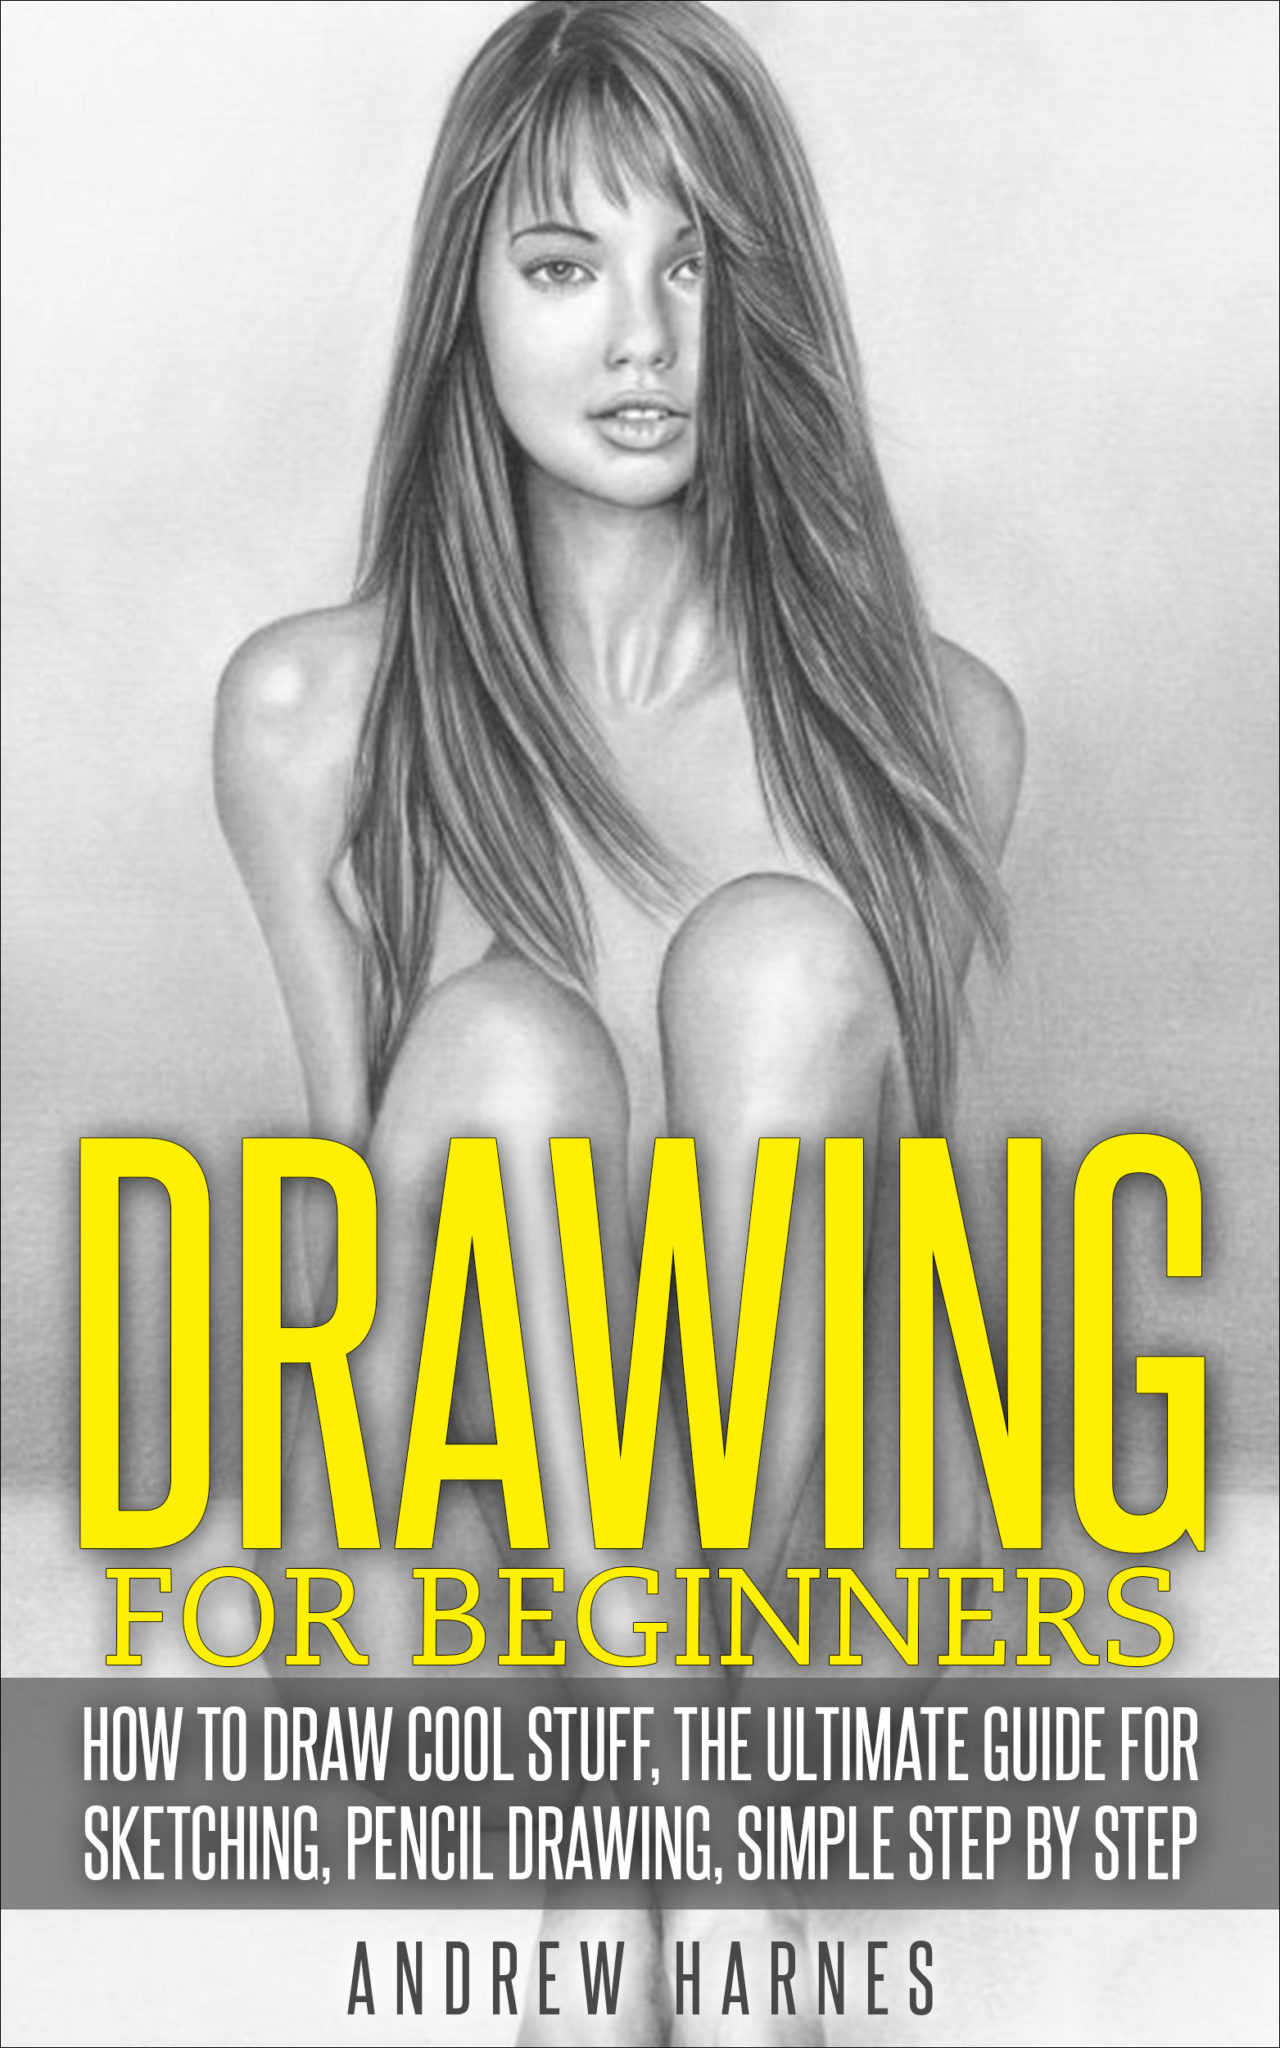 Drawing for Beginners by Andrew Harnes